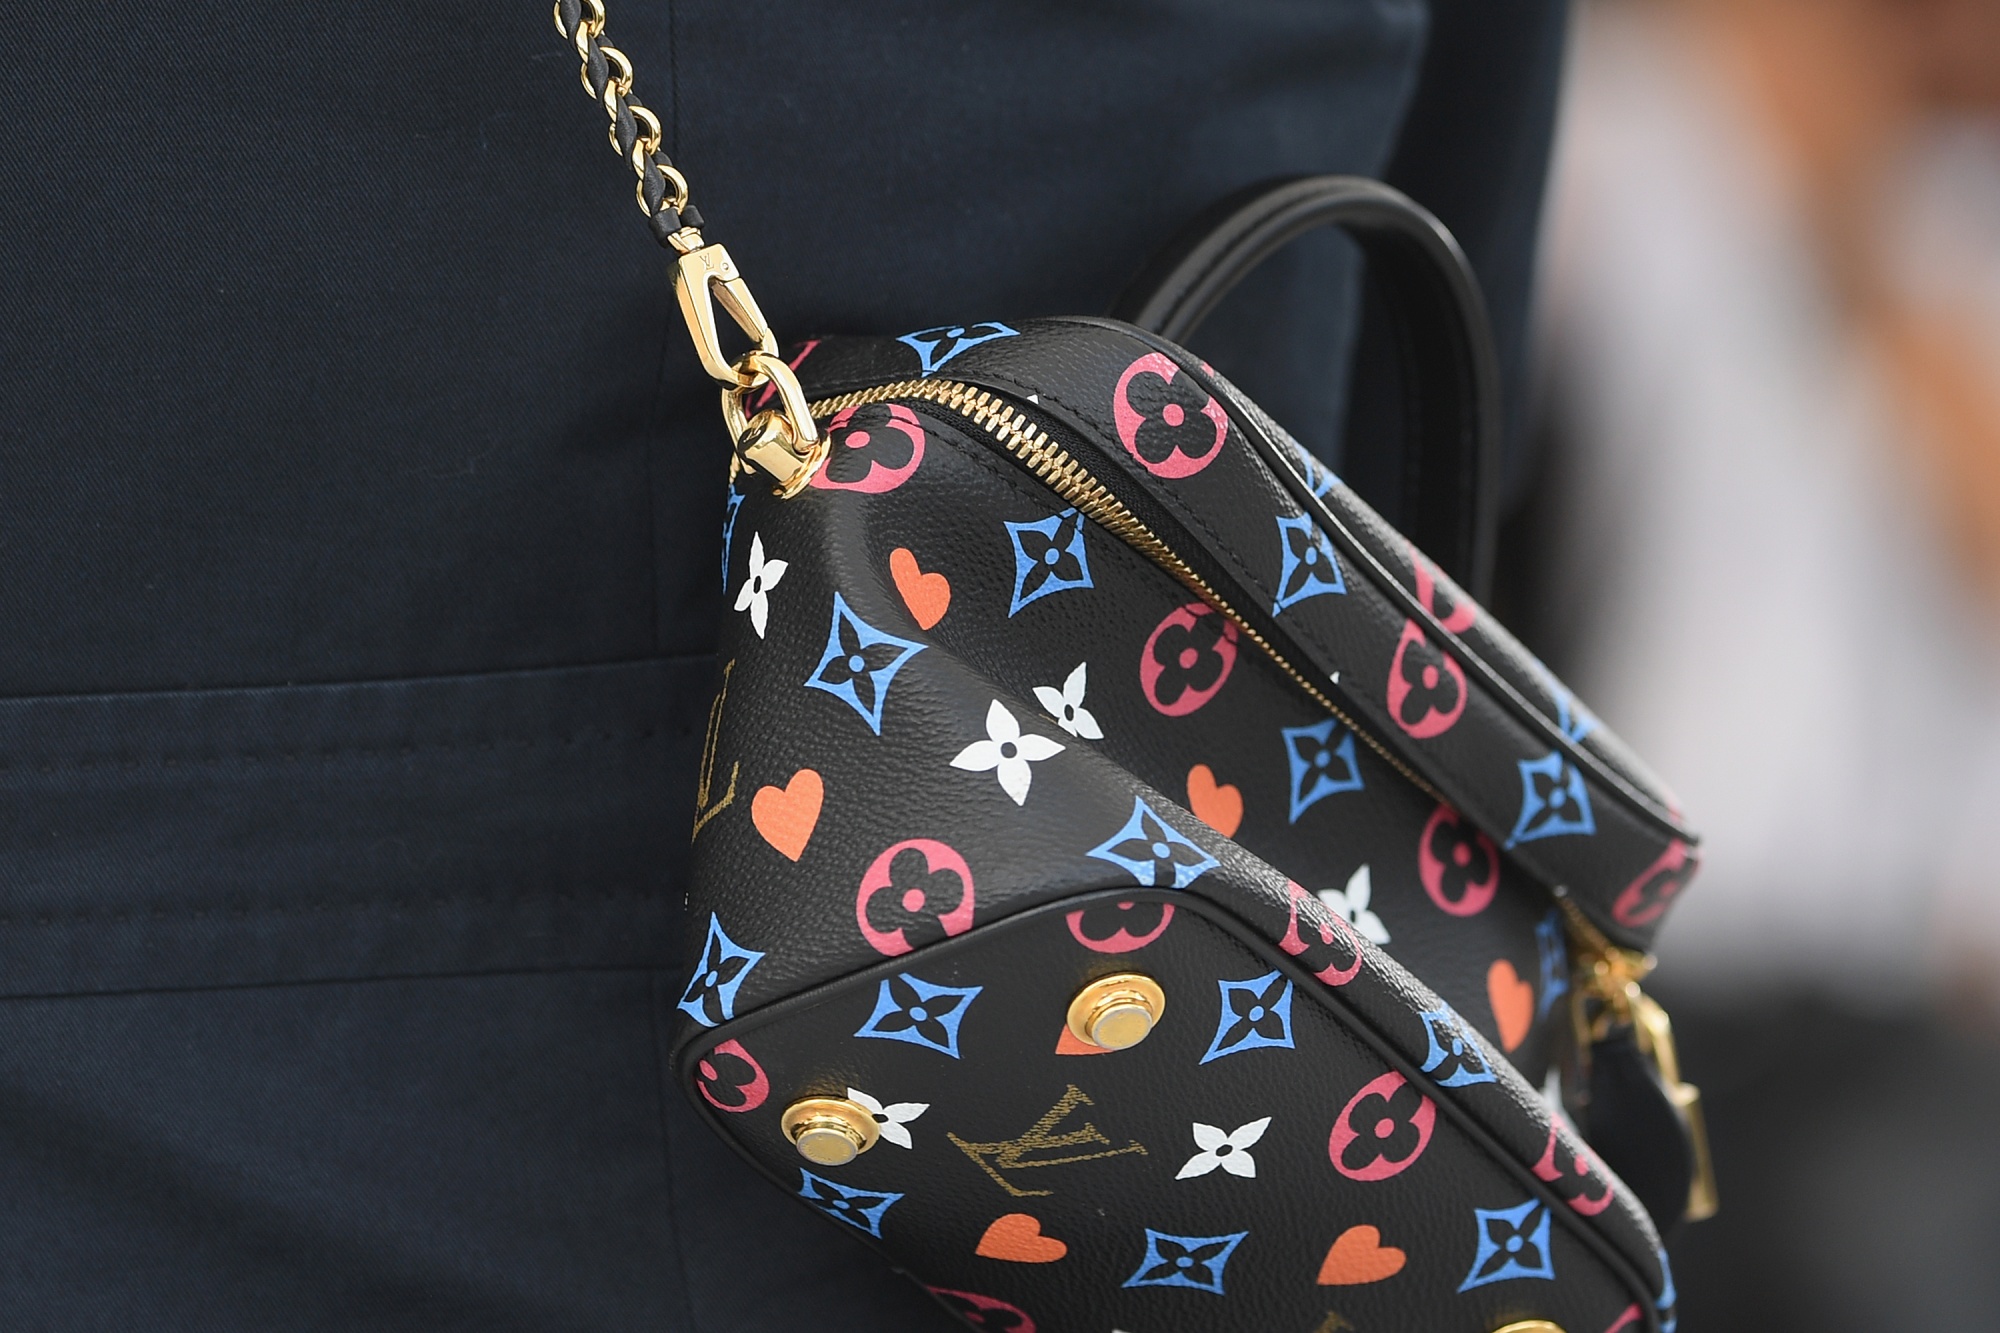 LVMH Bounces Back on Demand for Louis Vuitton and Dior Bags - Bloomberg